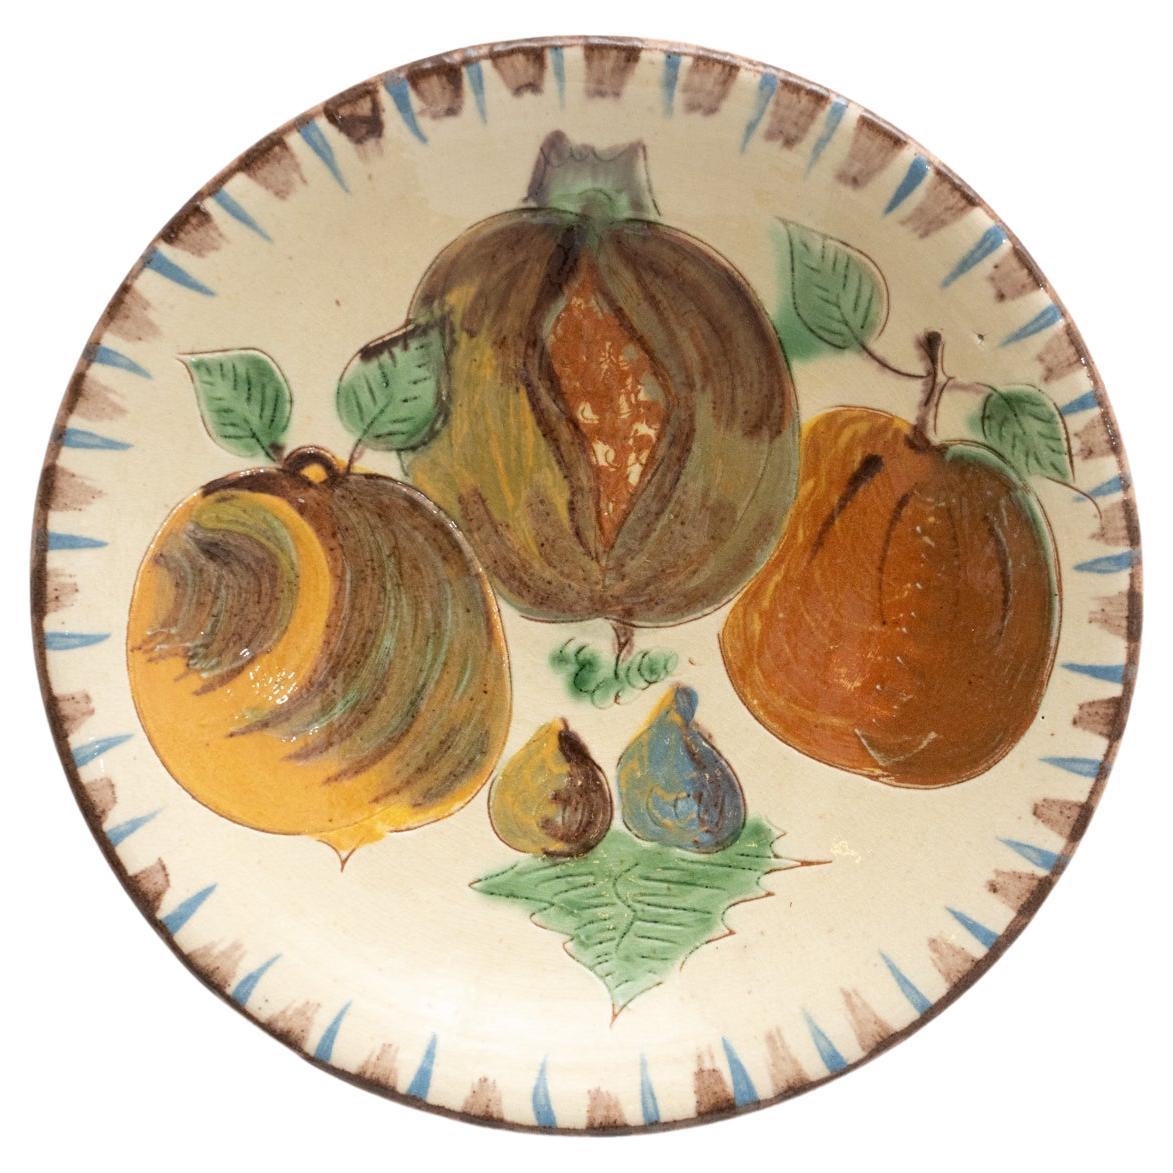 Ceramic Traditional Hand Painted Plate by Catalan Artist Puigdemont, circa 1960